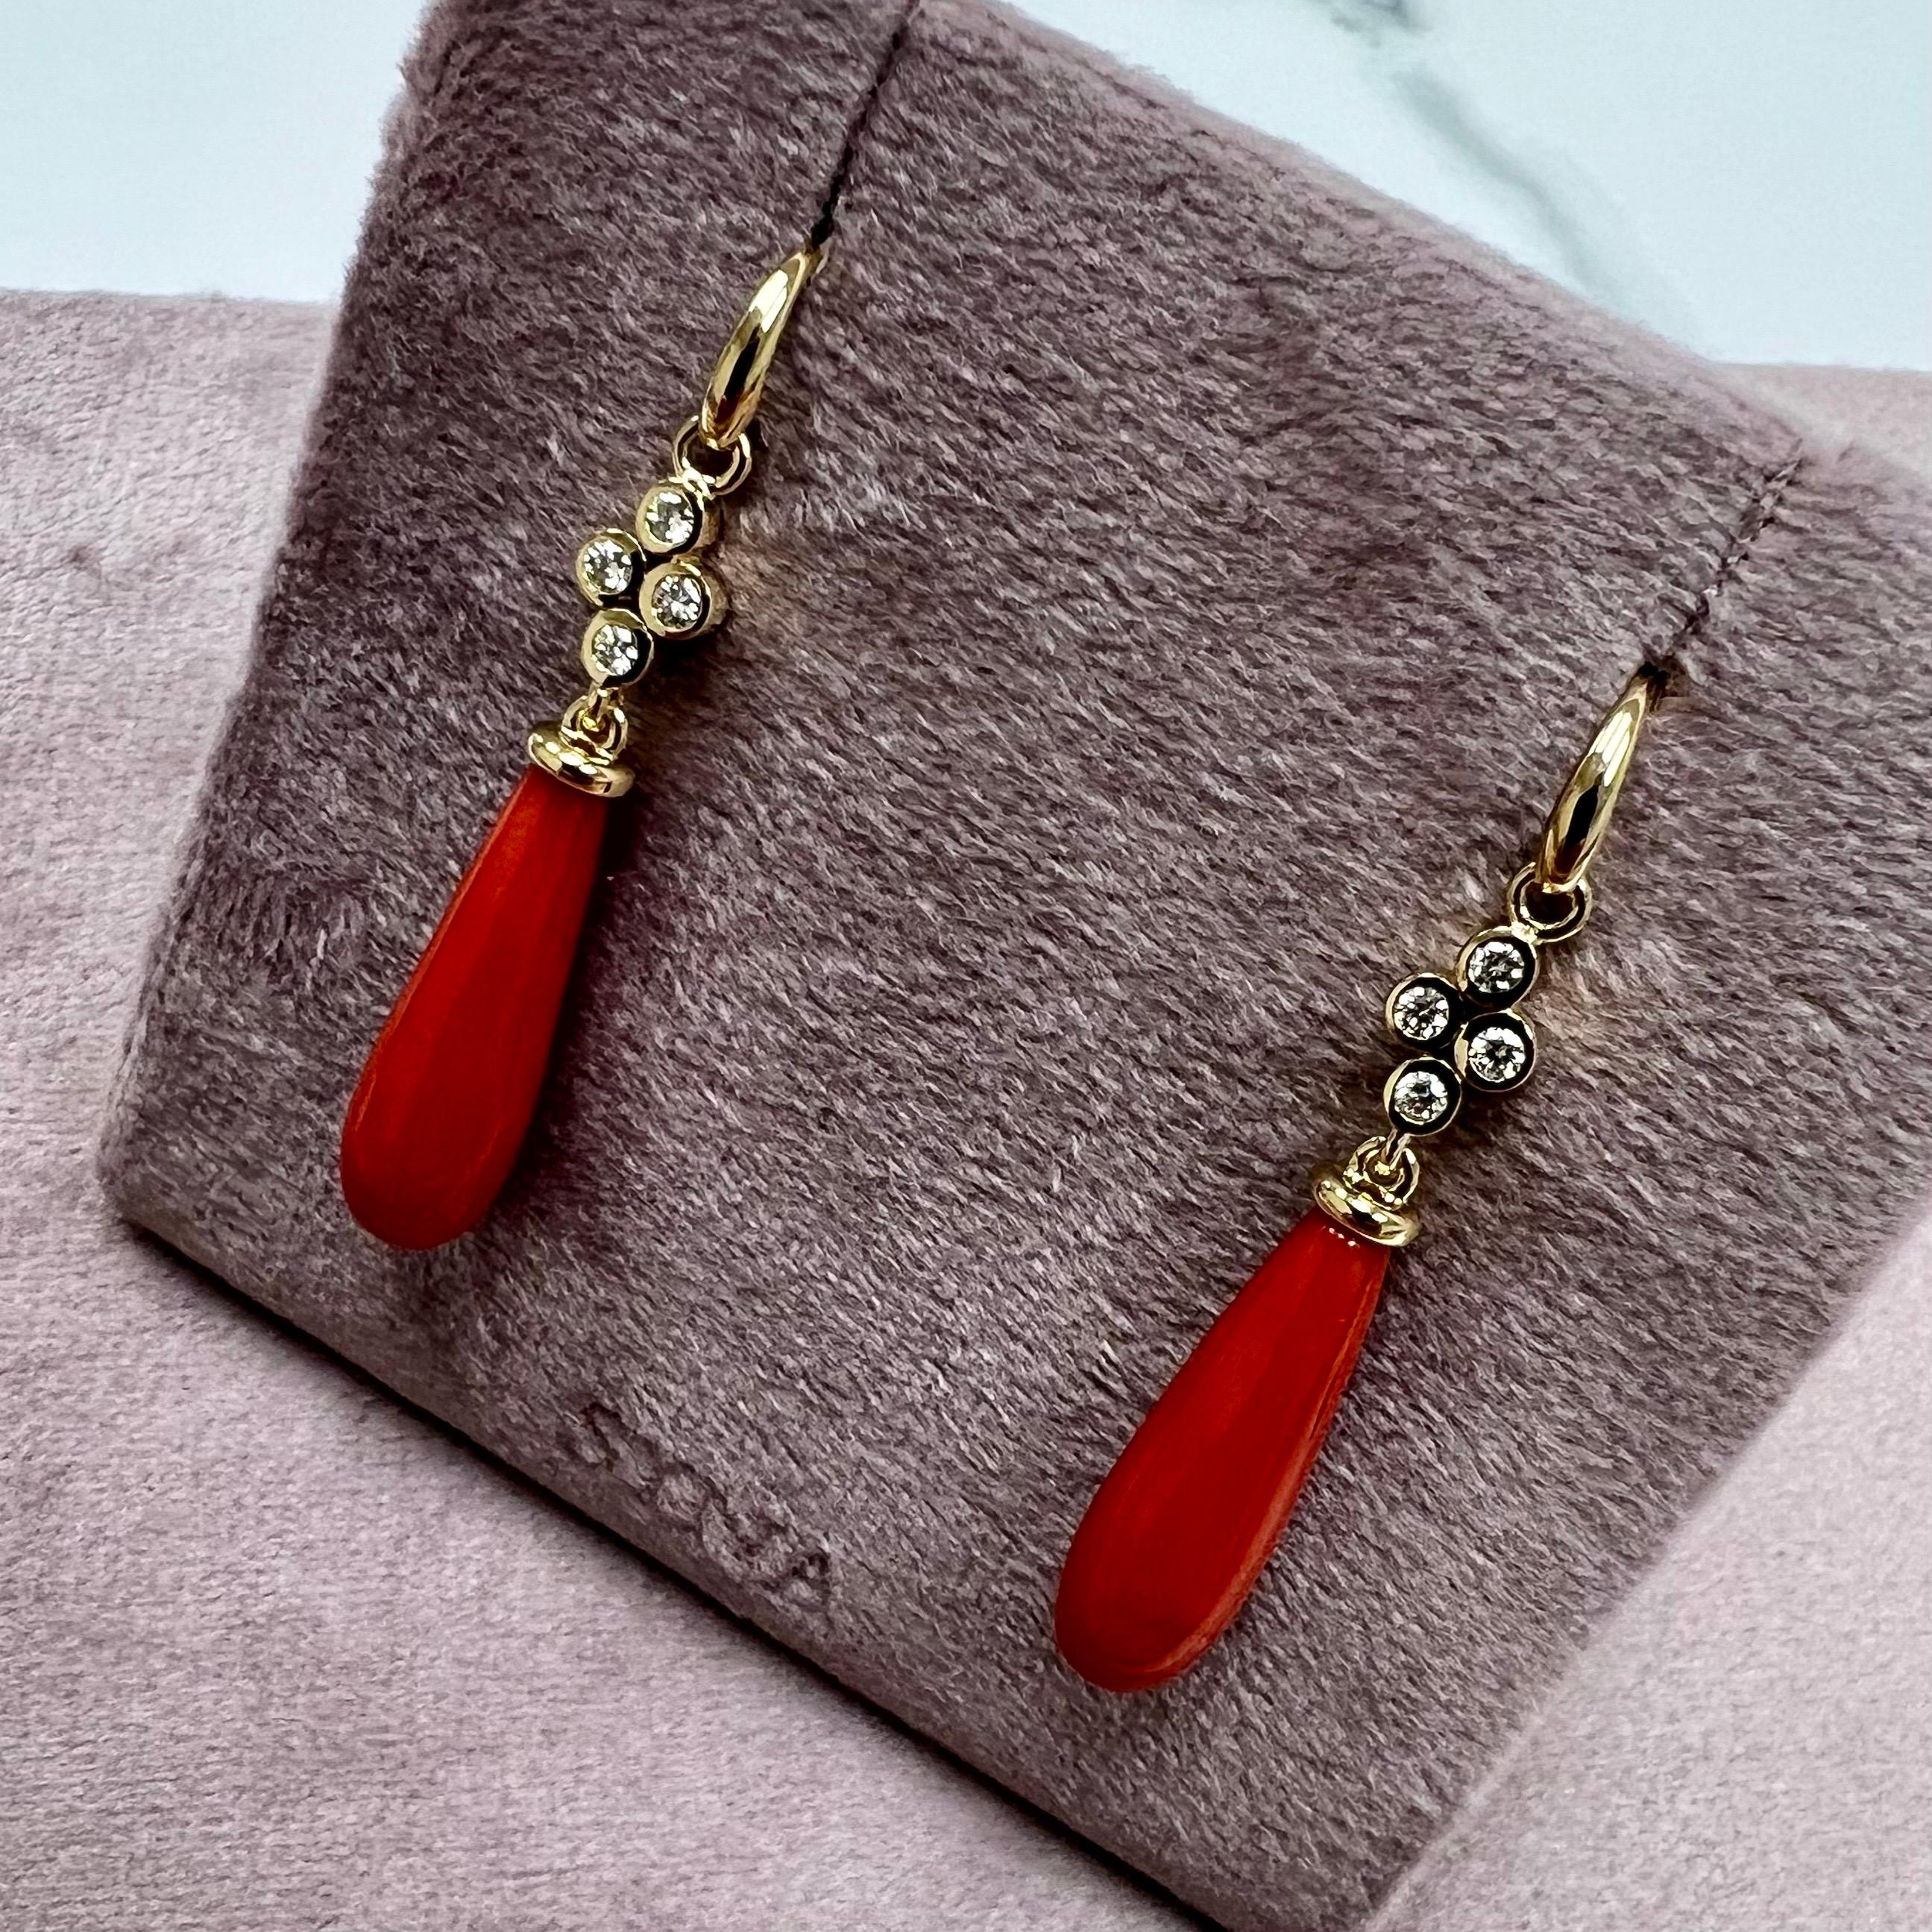 Created in 18 karat yellow gold
Coral 15 carats approx.
Bright diamonds 0.20 carat approx.
French wire for pierced ears
Limited edition


About the Designers

Drawing inspiration from little things, Dharmesh & Namrata Kothari have created an